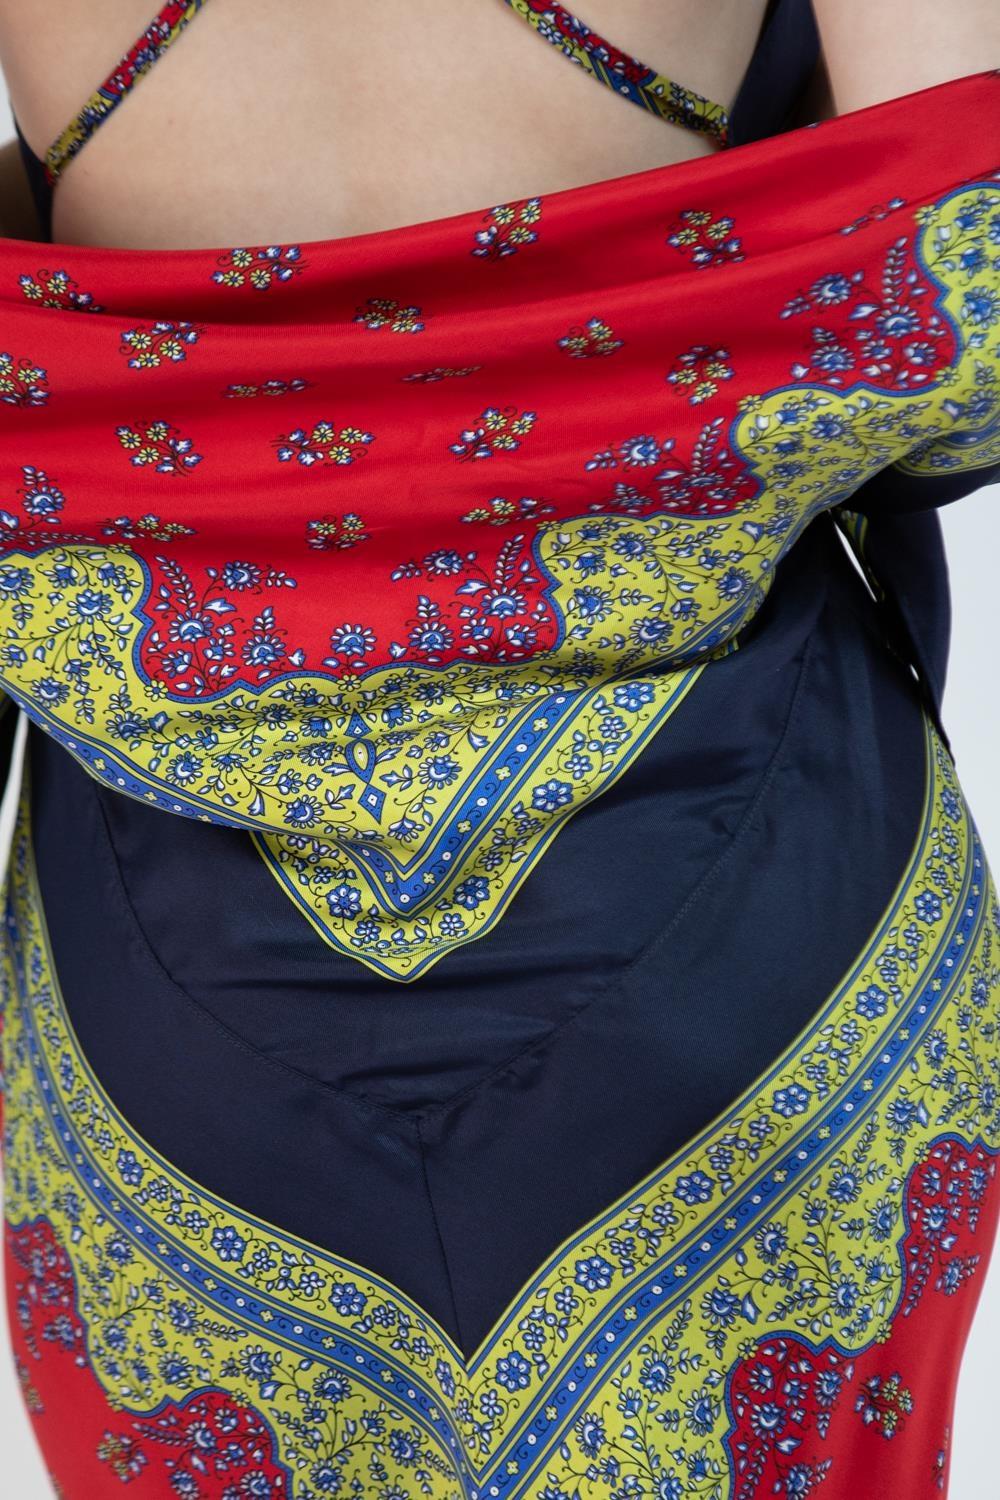 MORPHEW COLLECTION Navy Blue, Lime Green & Red Silk Twill Floral Ditsy Print Sc For Sale 3